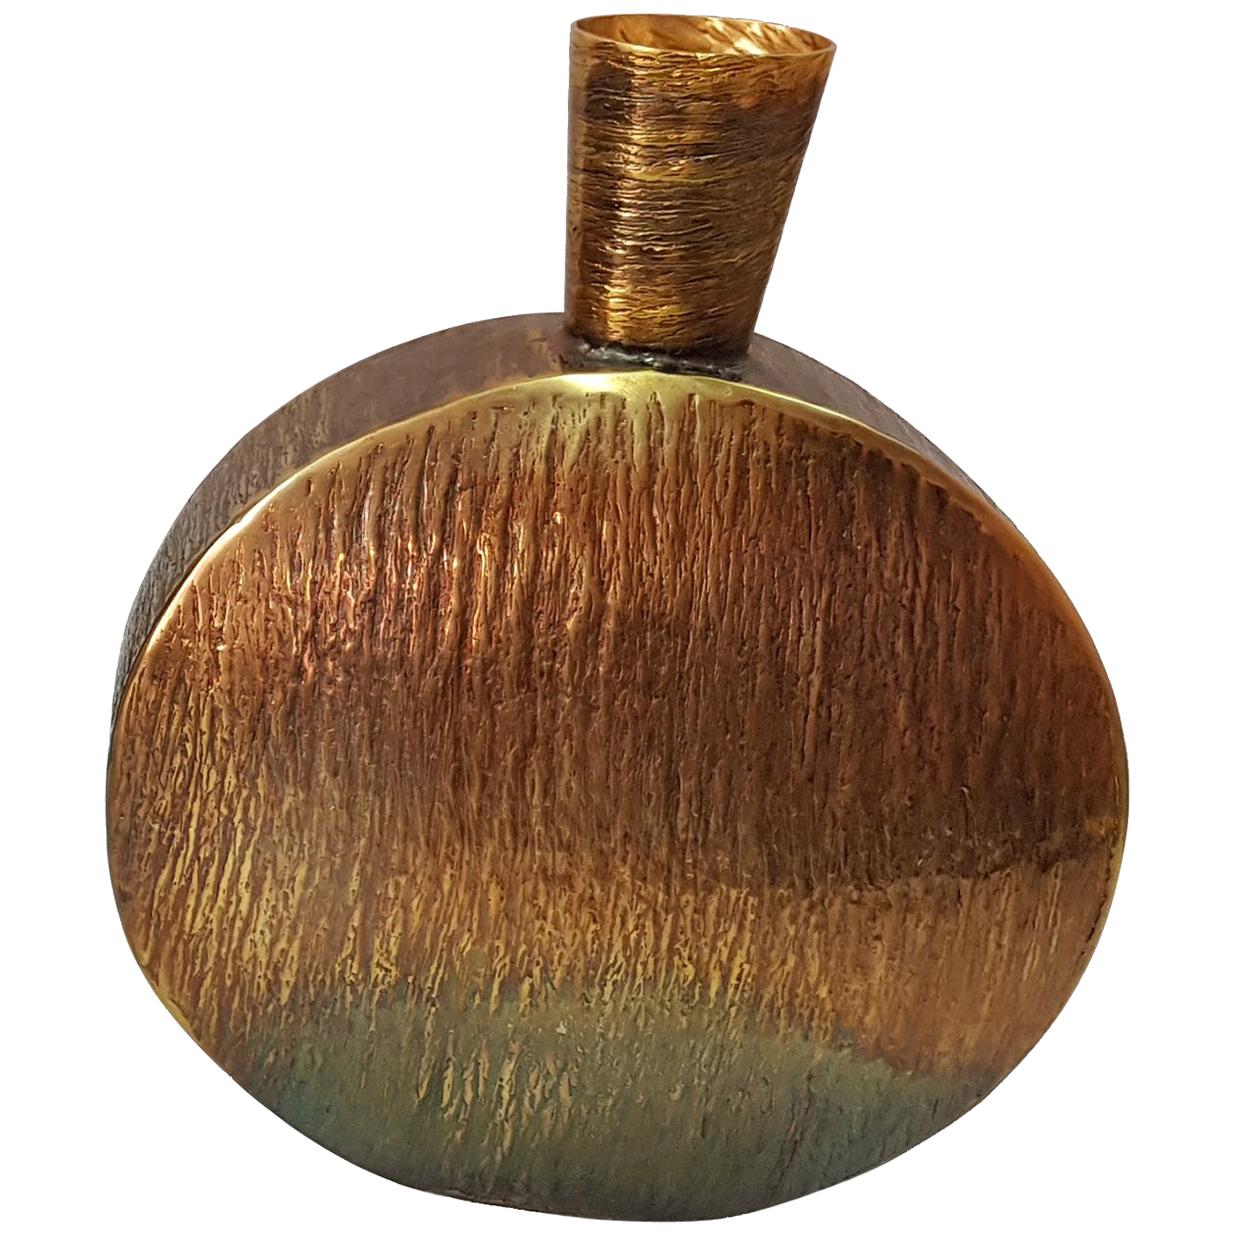 Oswell Small Vase in Burnt Brass by CuratedKravet